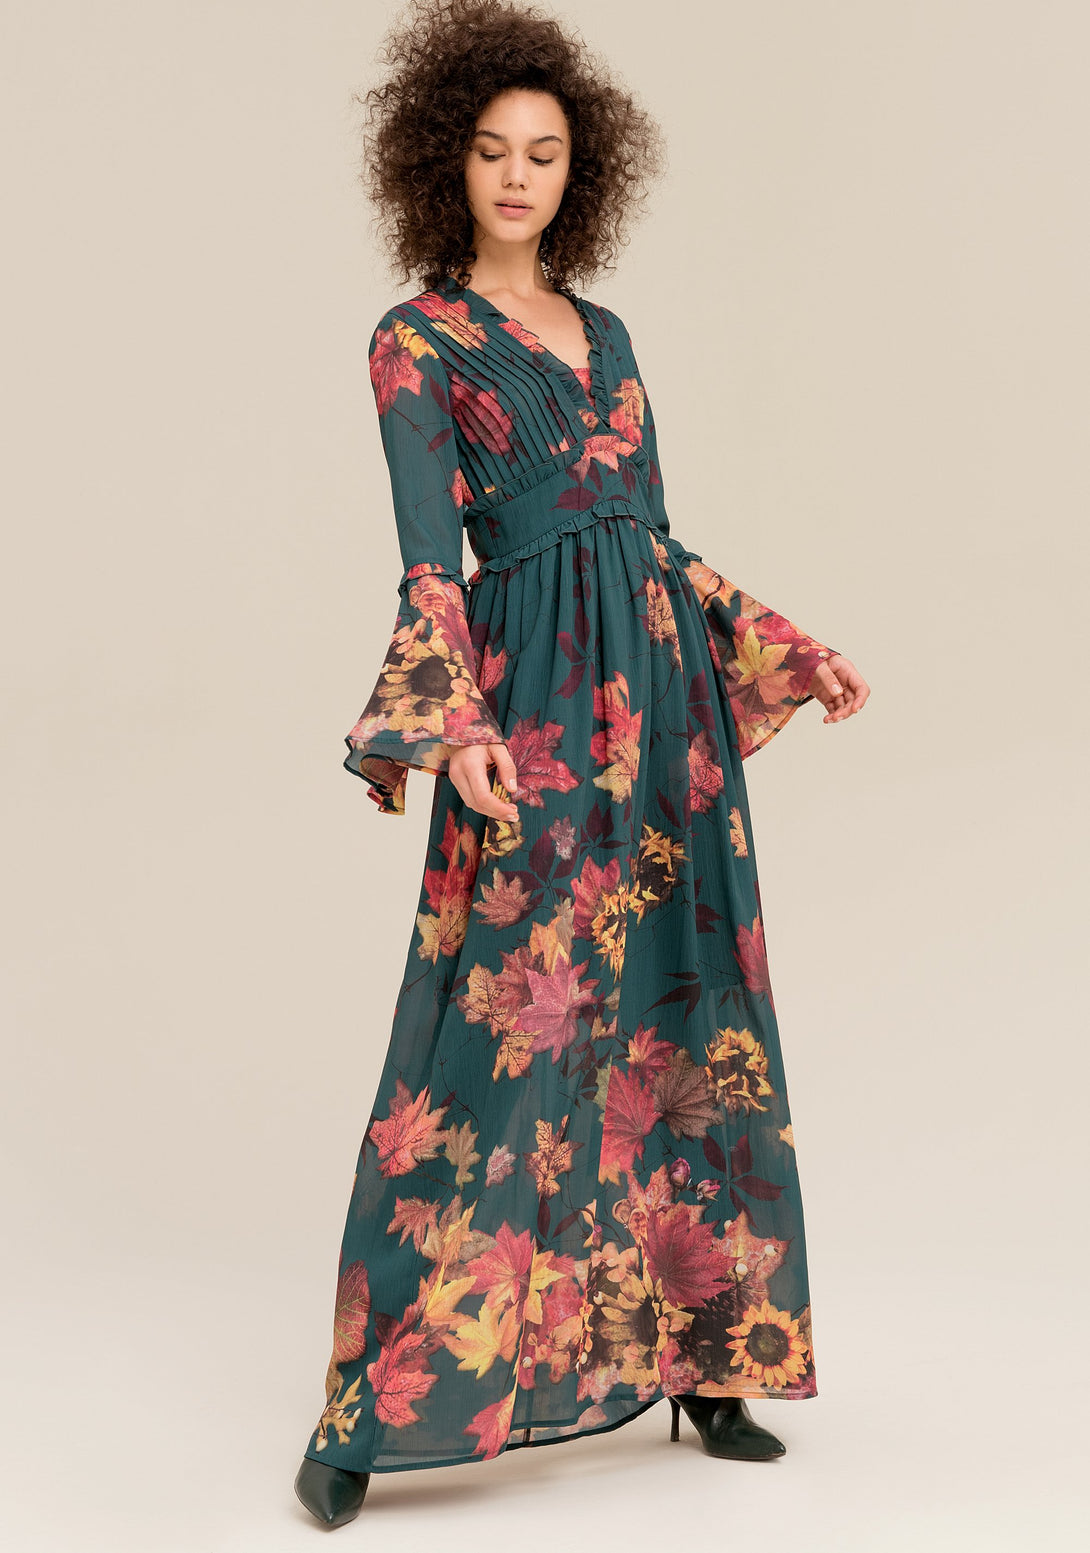 Dress regular fit, long, with flowery pattern